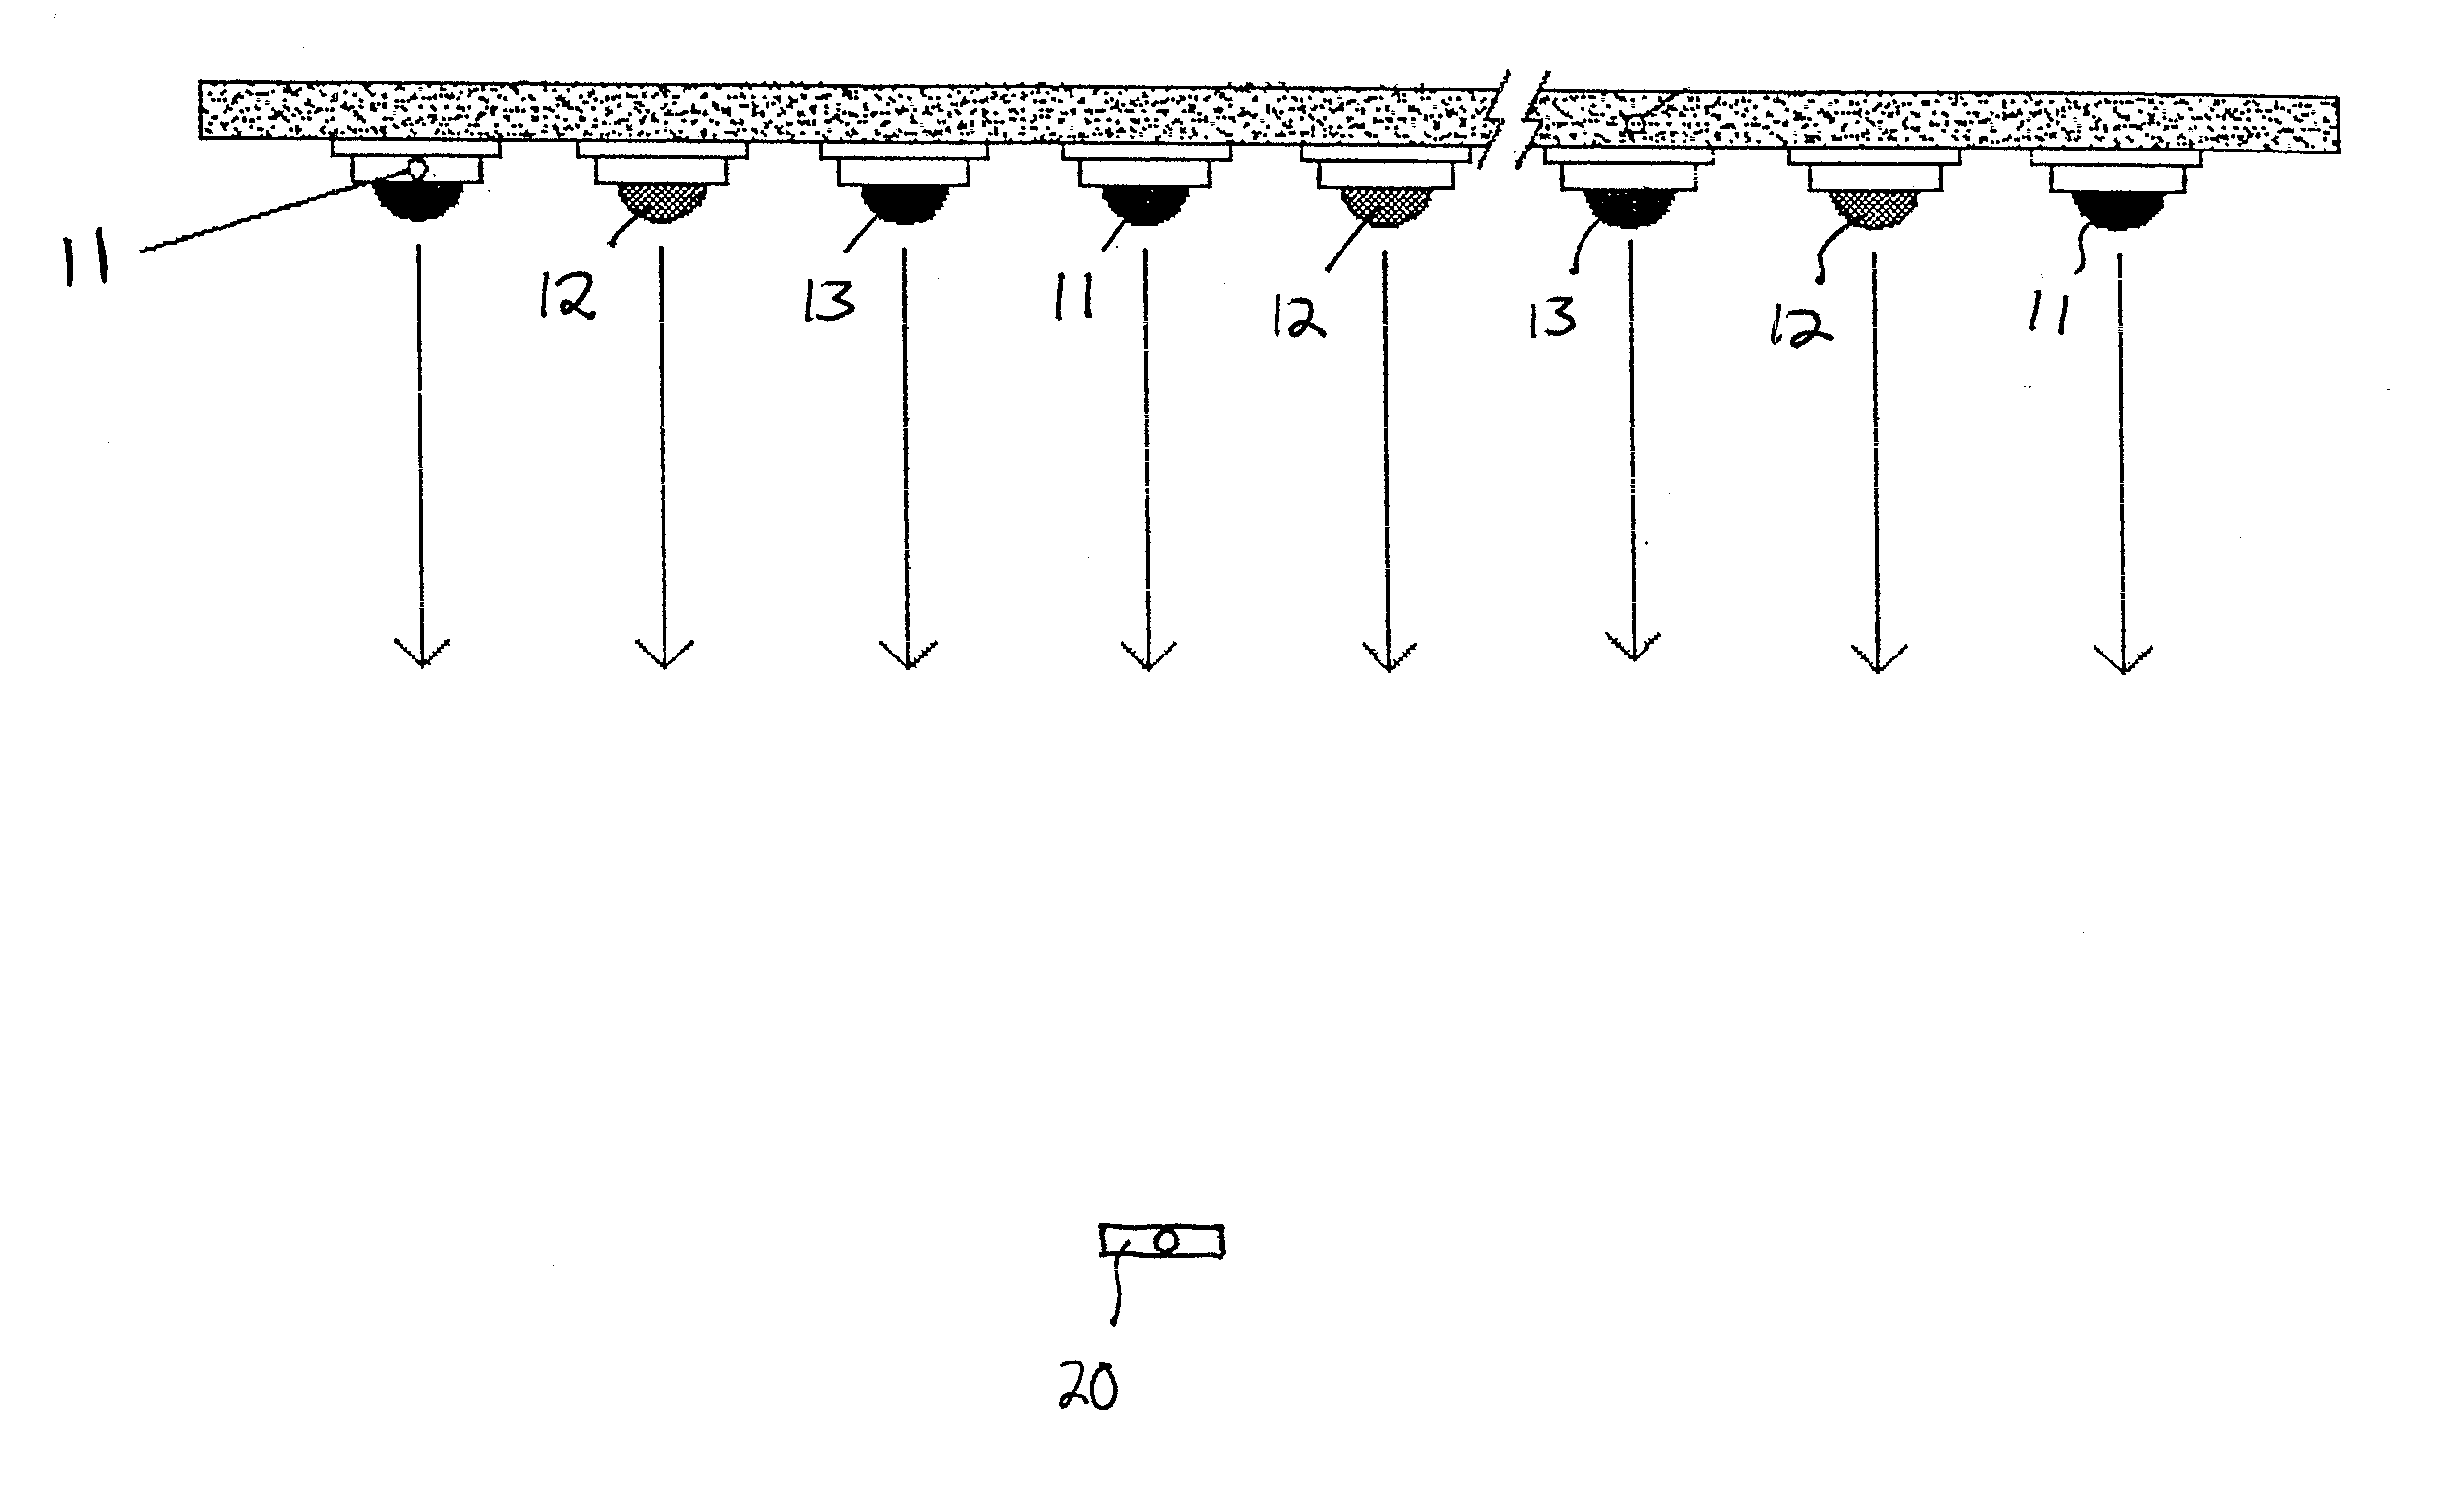 Lighting device with color control, and method of lighting